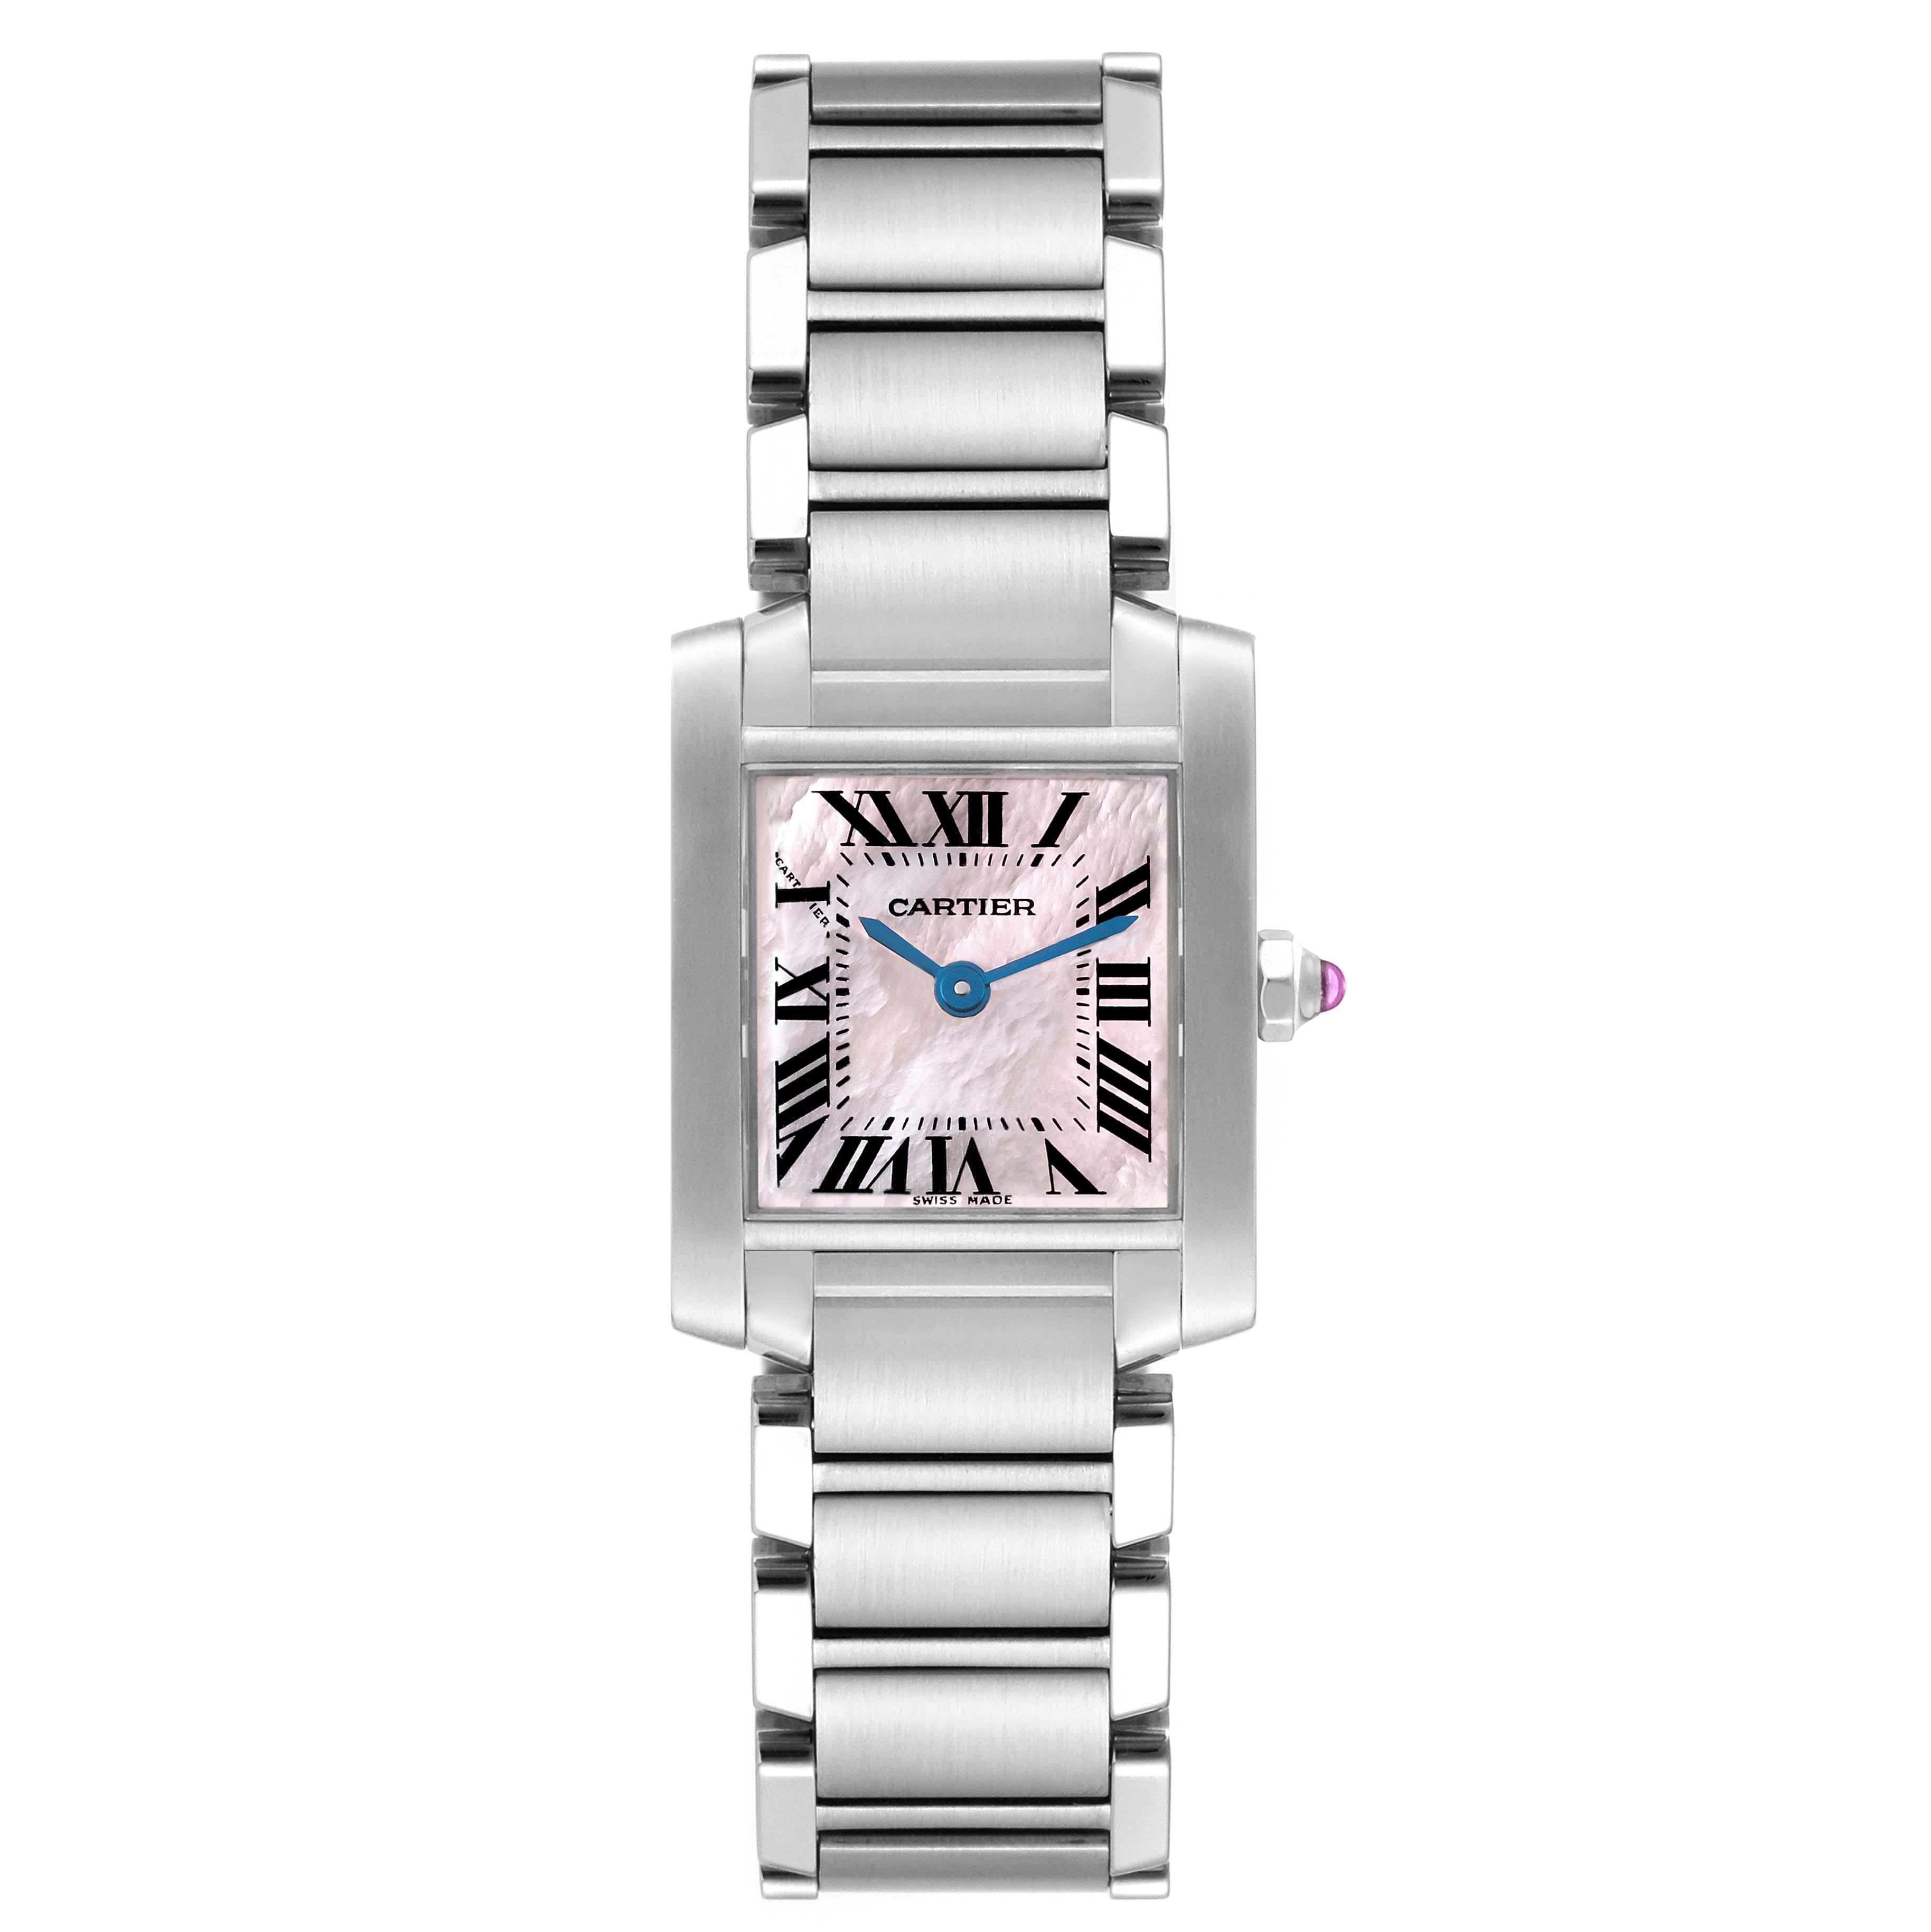 Cartier Tank Francaise Pink Mother of Pearl Dial Steel Ladies Watch W51028Q3. Quartz movement. Rectangular stainless steel 20.0 x 25.0 mm case. Octagonal crown set with a pink spinel cabochon. . Scratch resistant sapphire crystal. Pink mother of